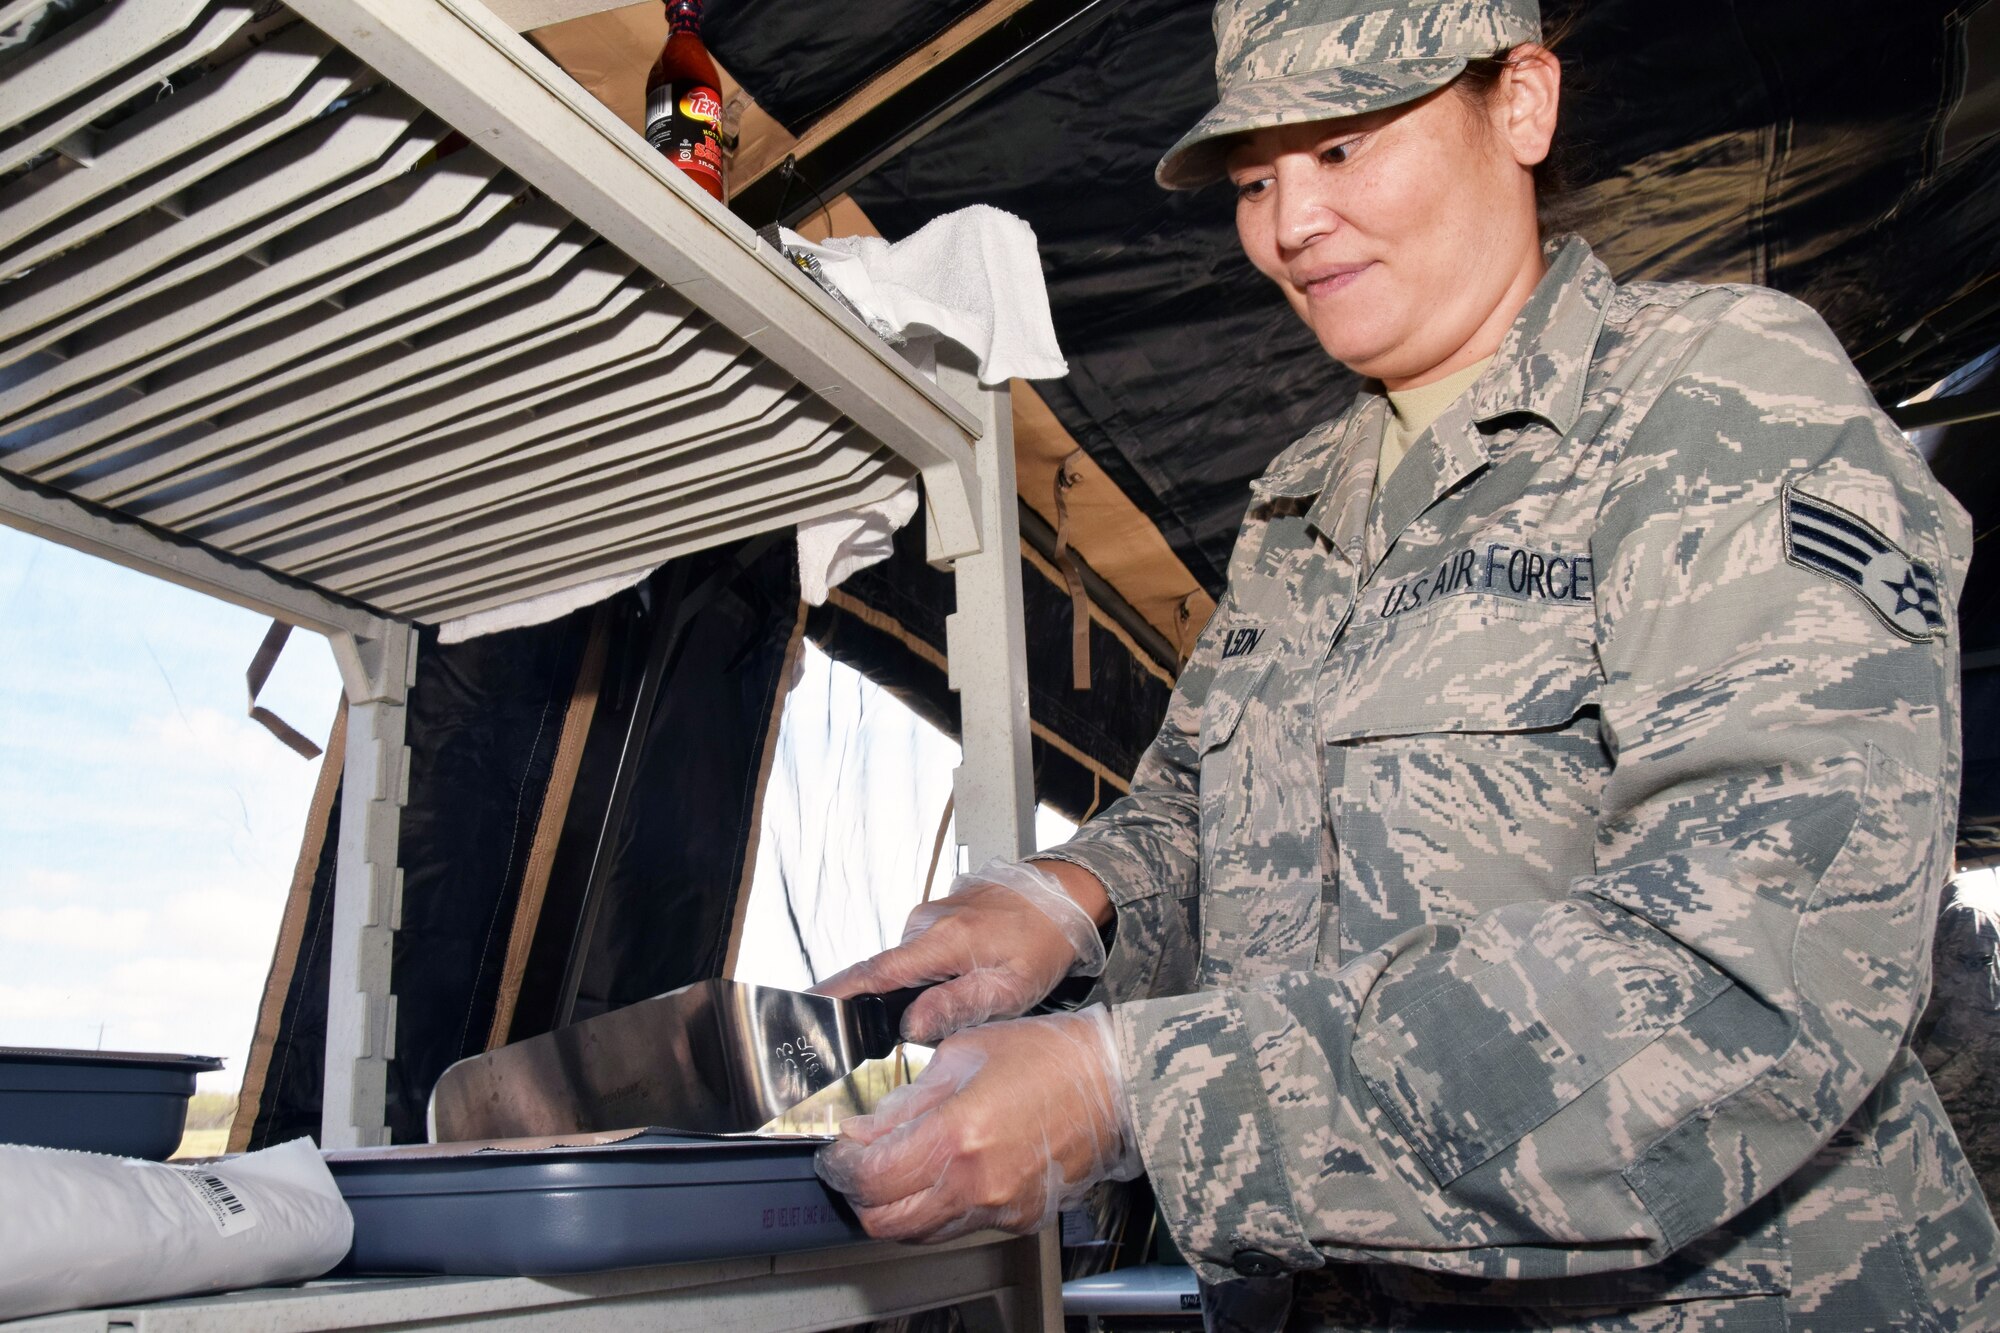 Senior Airman Beatrice V. Chilson, 433rd Force Support Squadron food service specialist, prepares red velvet cake in a single pallet expeditionary kitchen during a wing-wide readiness exercise at Joint Base San Antonio-Lackland, Texas Nov. 17, 2018.